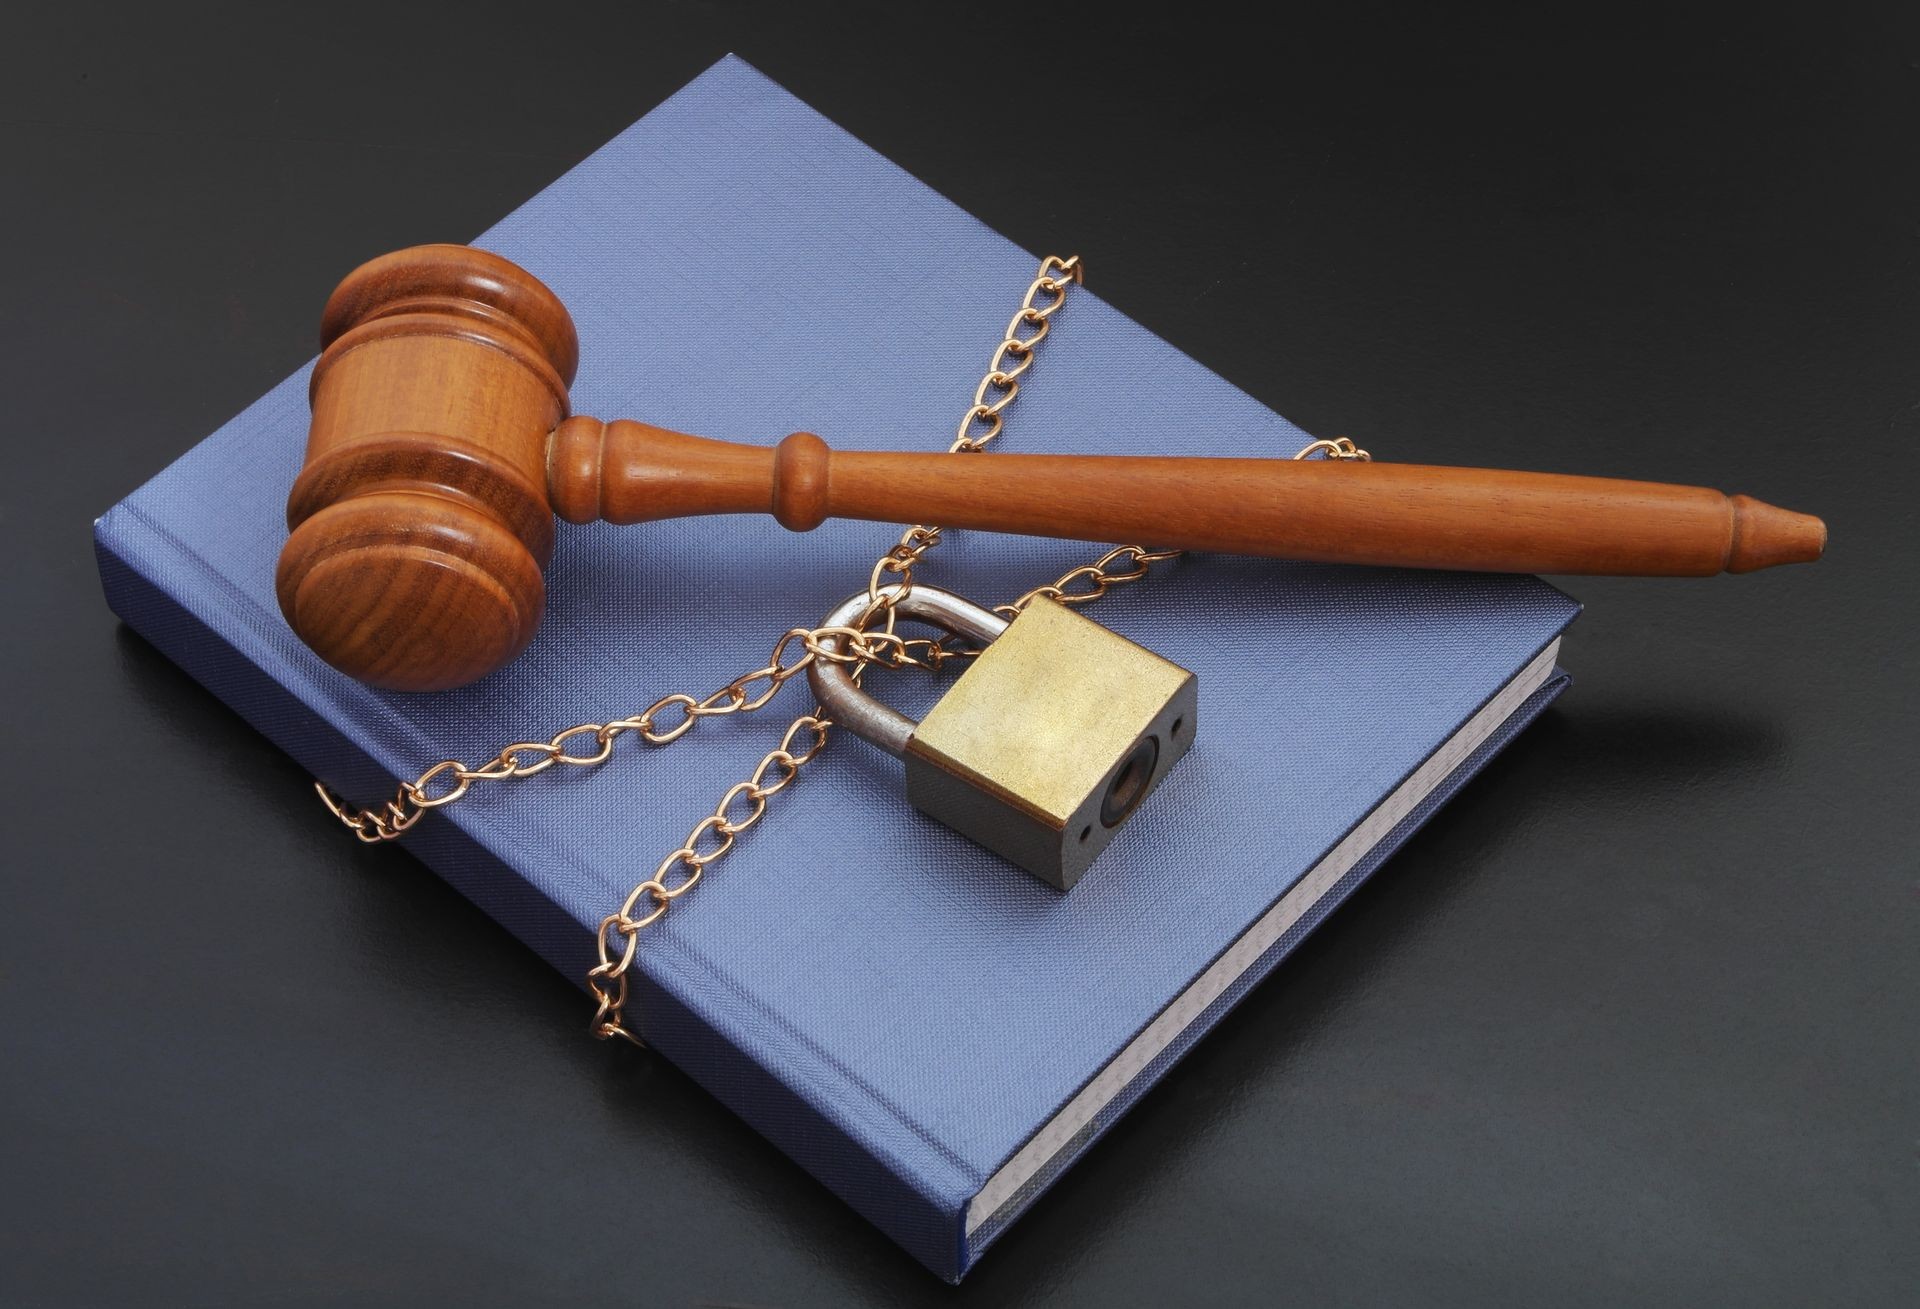 Information security concept, banned book, gavel, book with chain and padlock